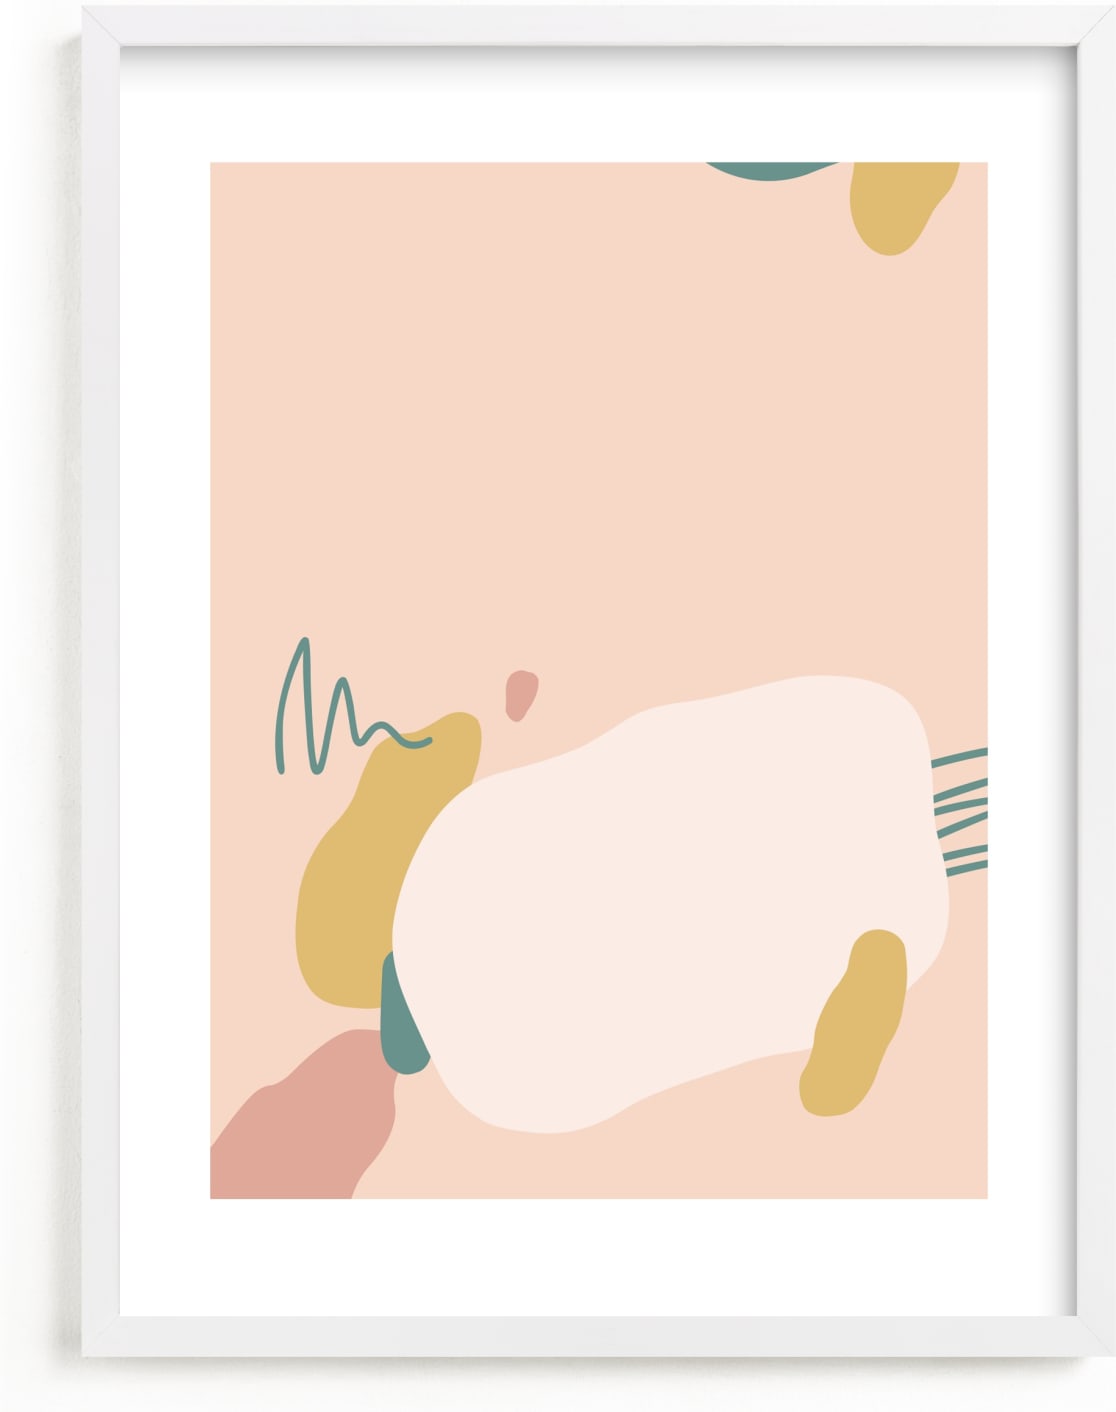 This is a blue kids wall art by Olivia Goree called Just Peachy.